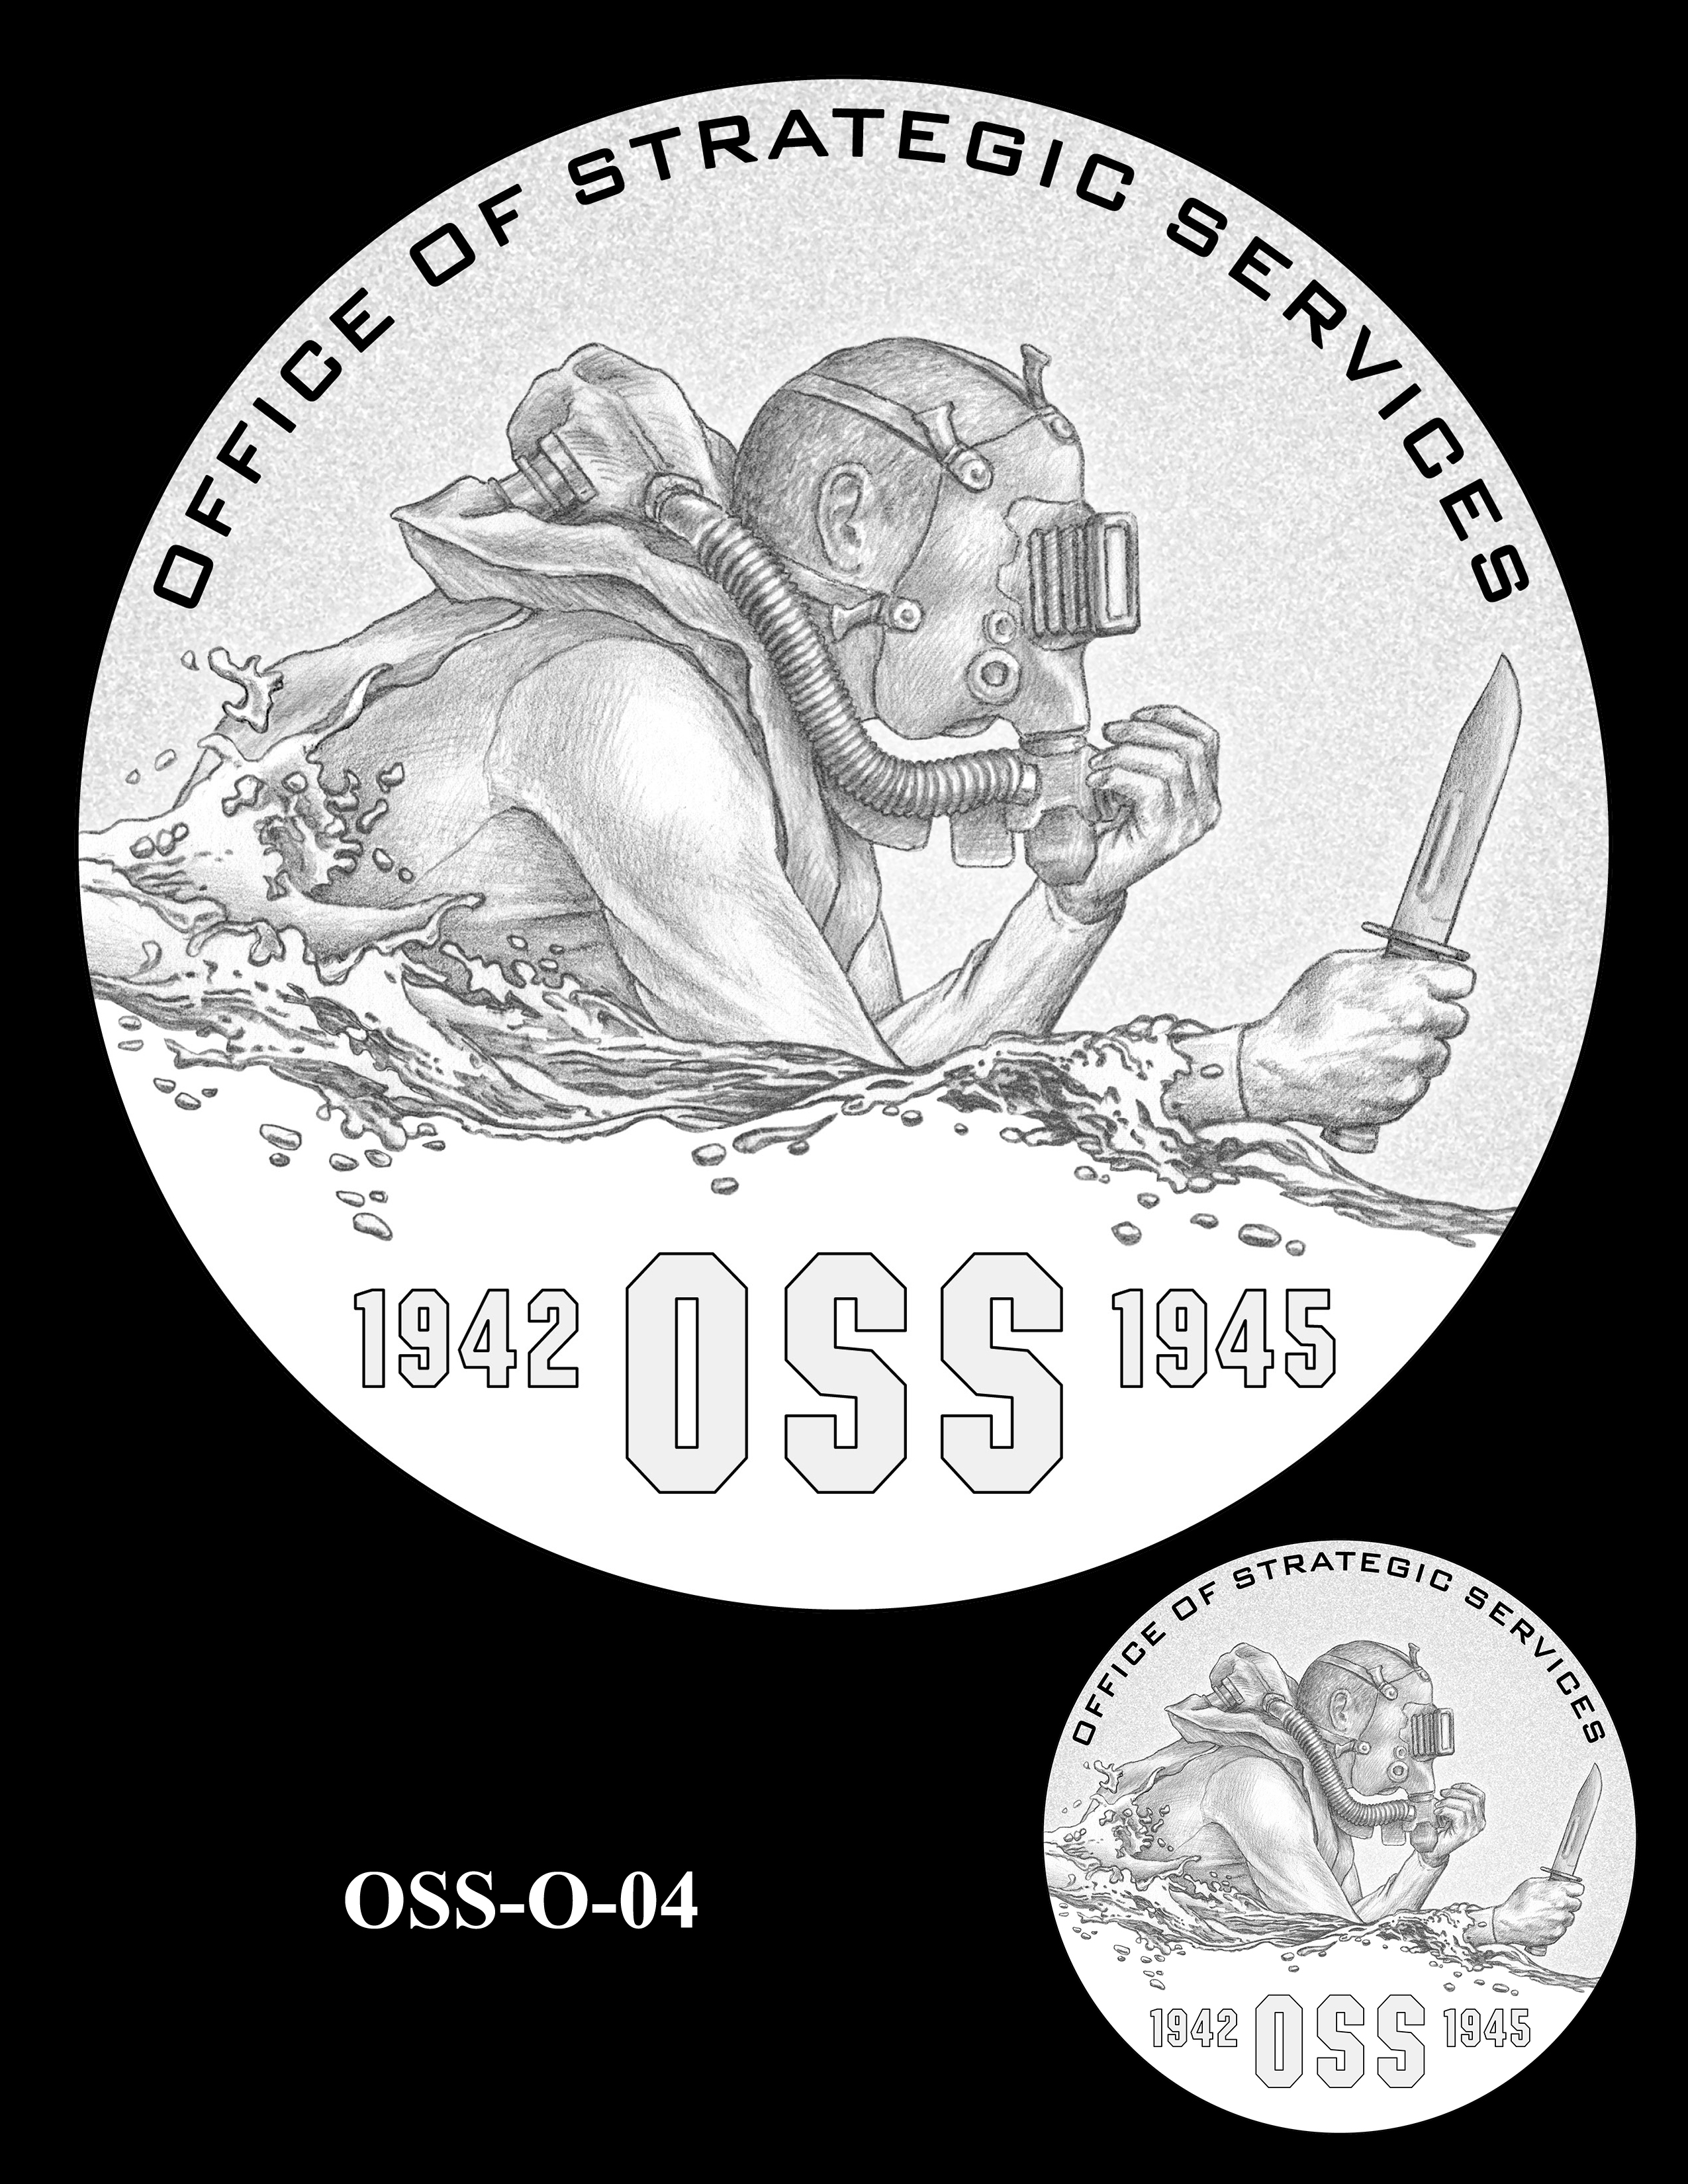 OSS-O-04 -- Office of Strategic Services Congressional Gold Medal